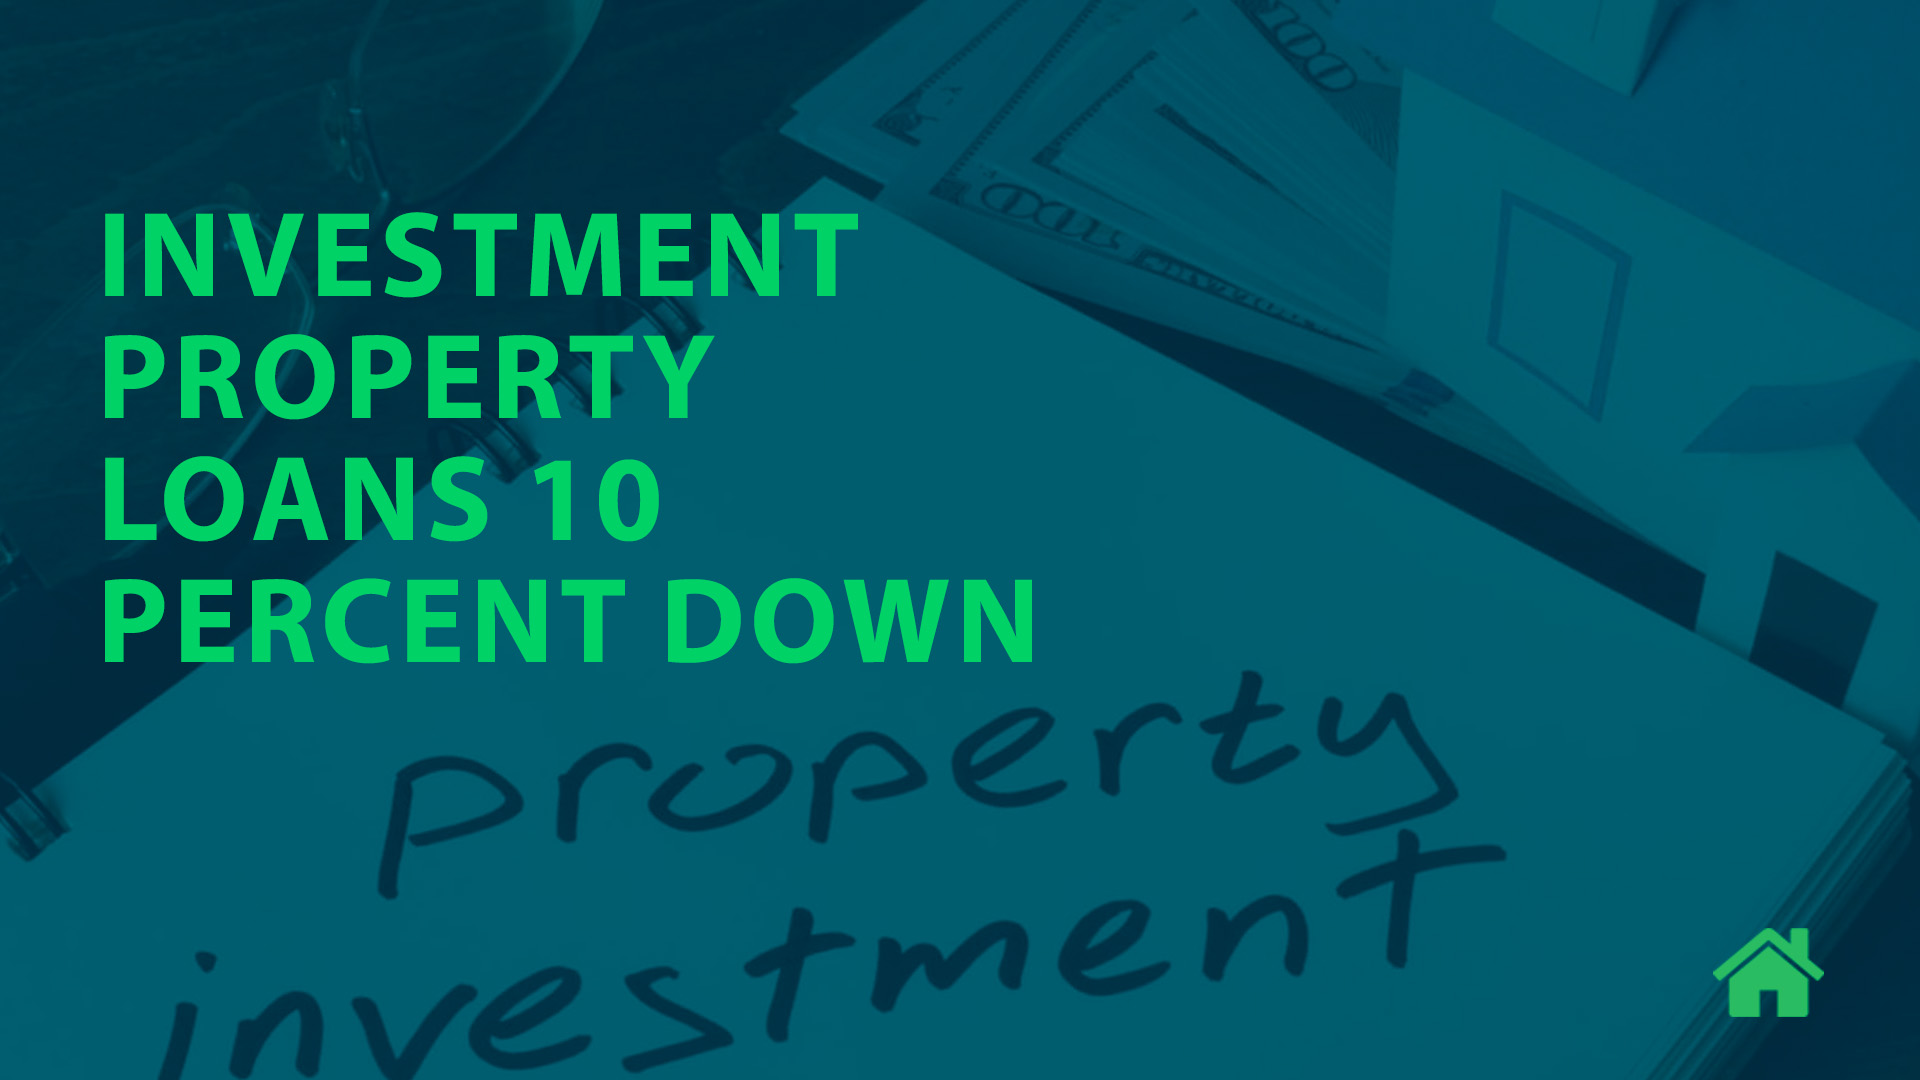 Investment property loans 10 percent down